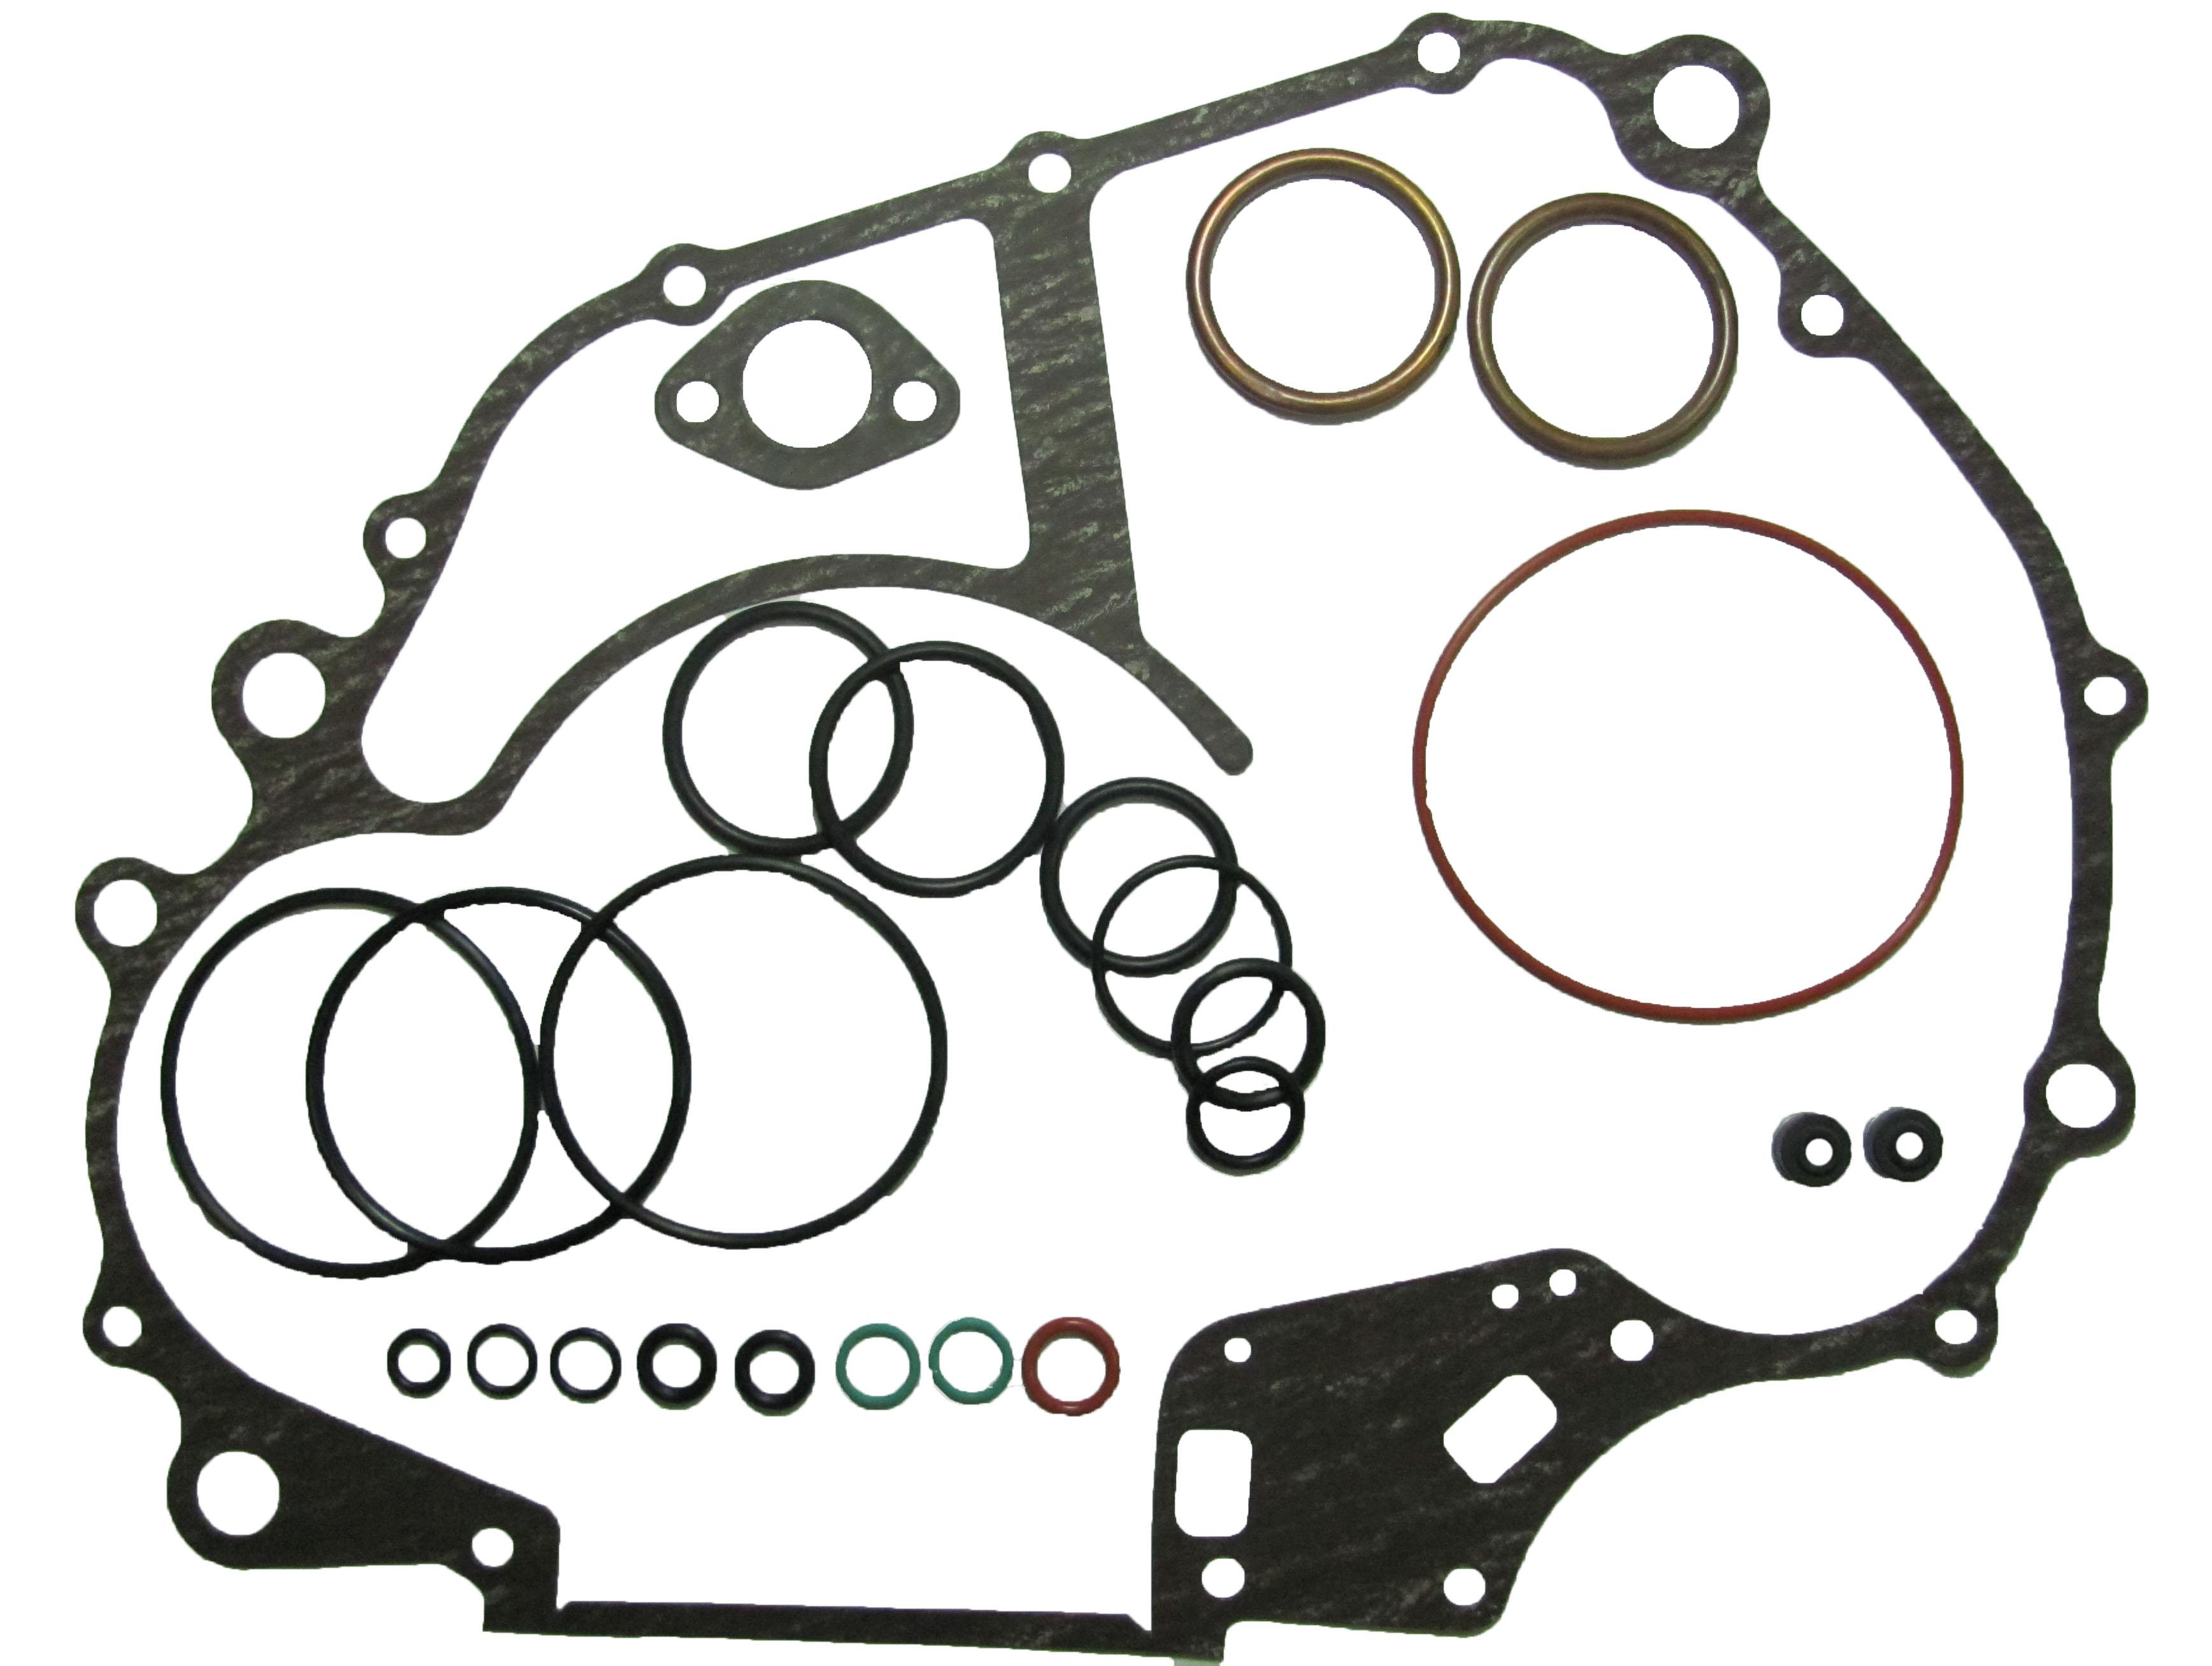 Complete Gasket Set FC808819 Freedom County ATV 